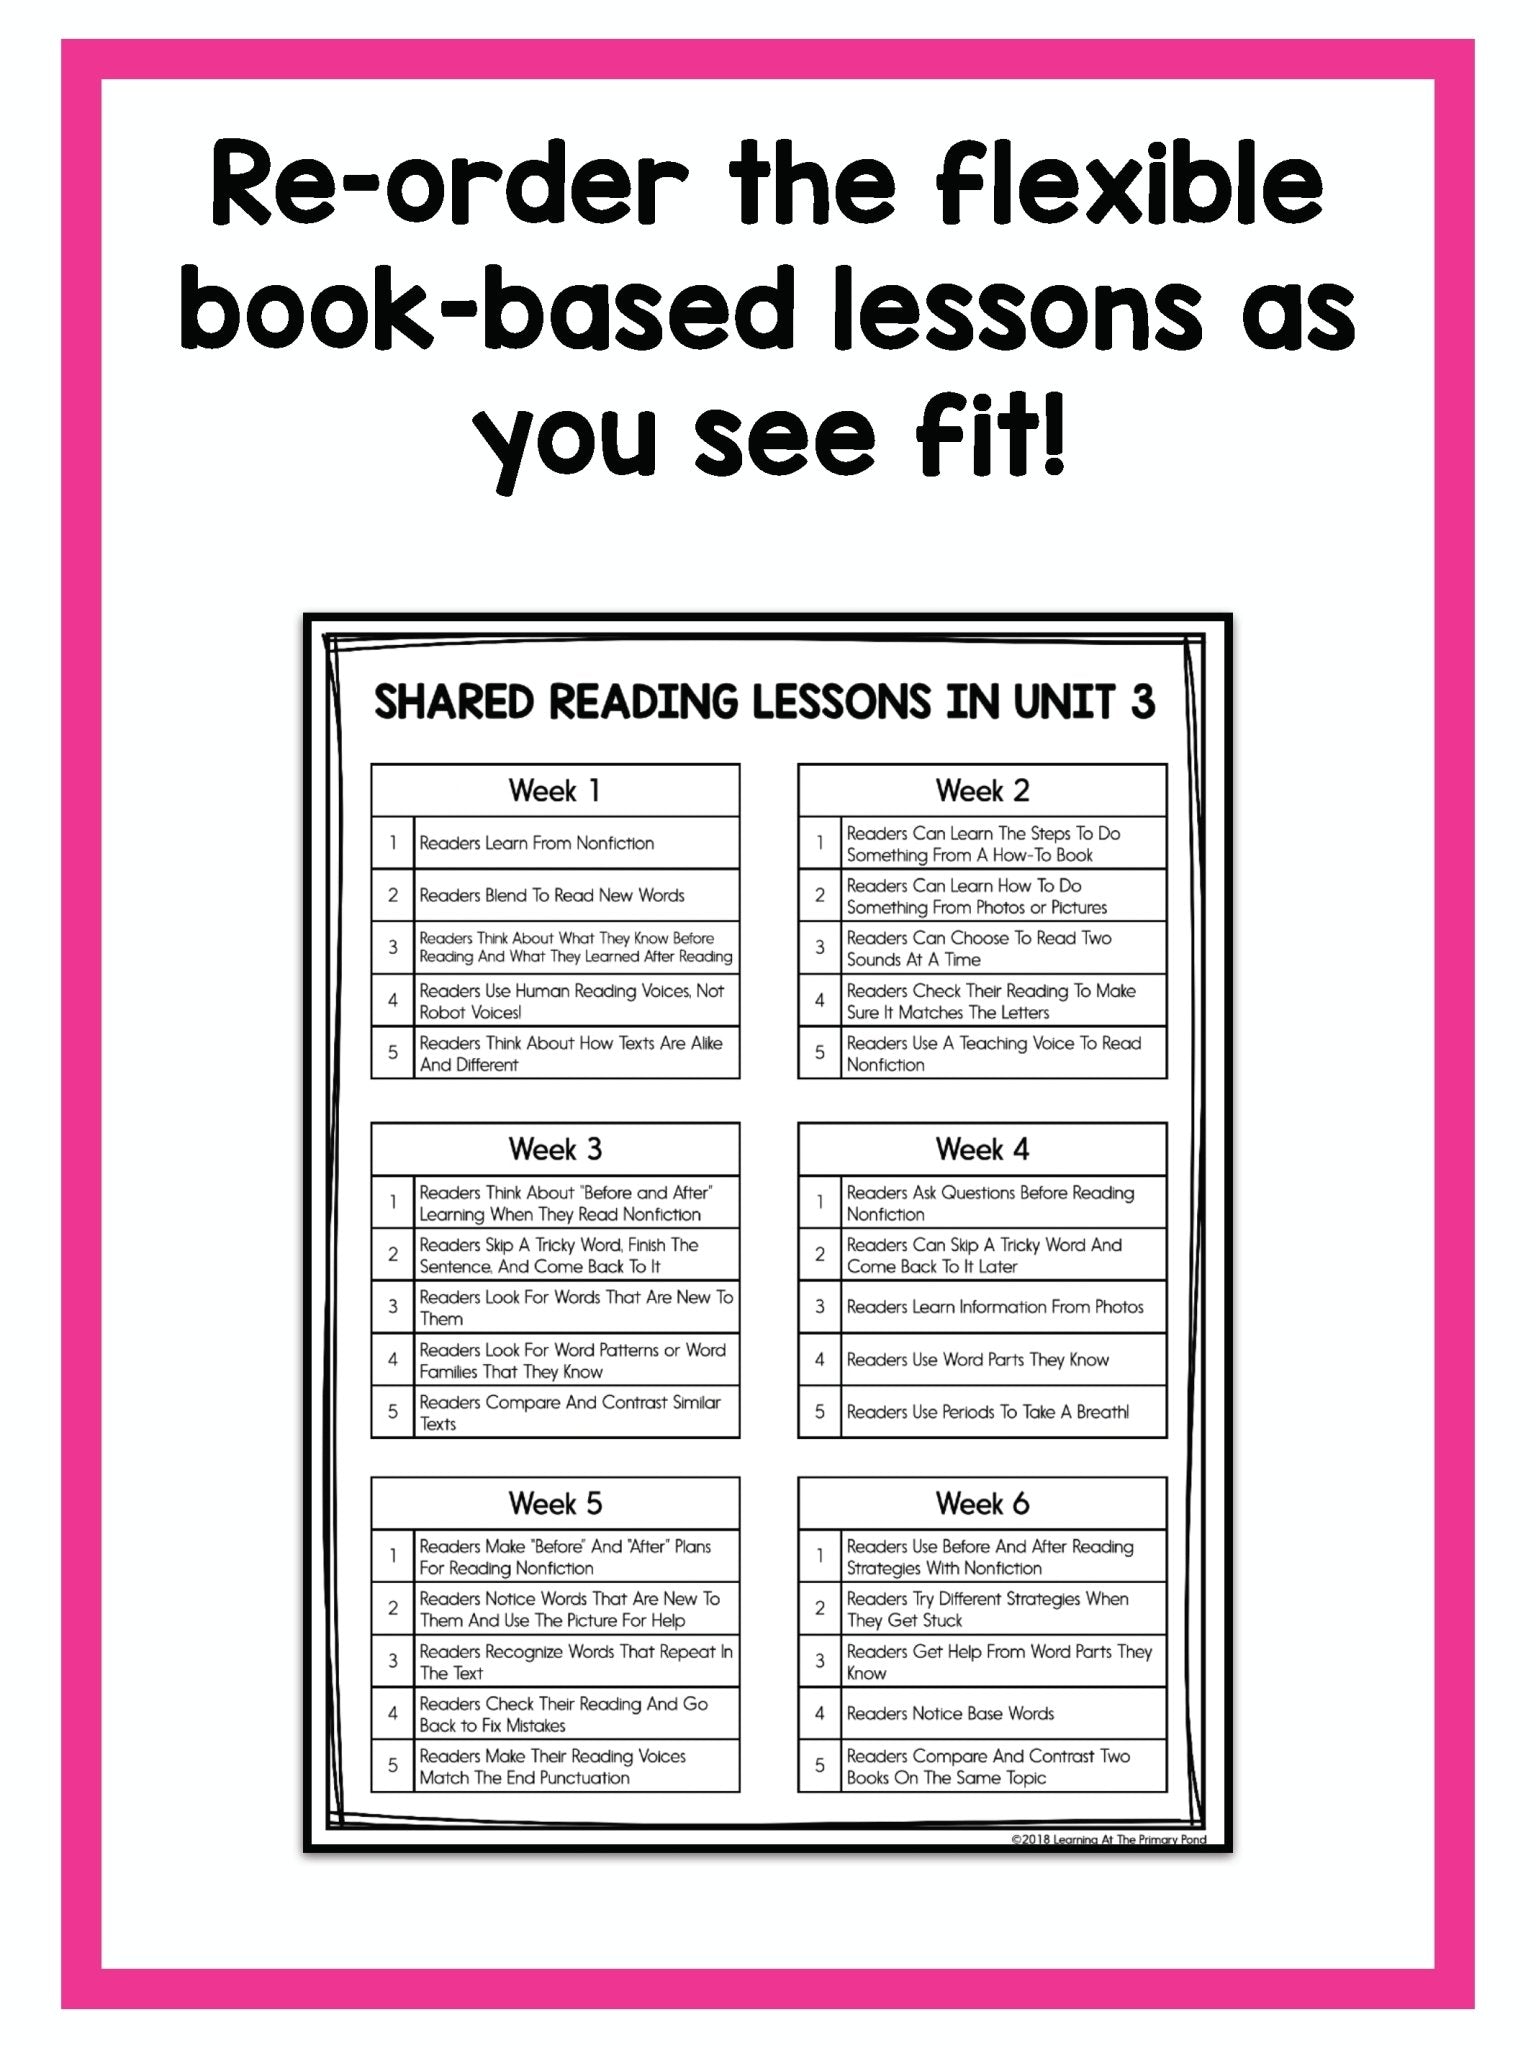 Kindergarten Reading Workshop BUNDLE of Shared Reading Lessons - learning-at-the-primary-pond